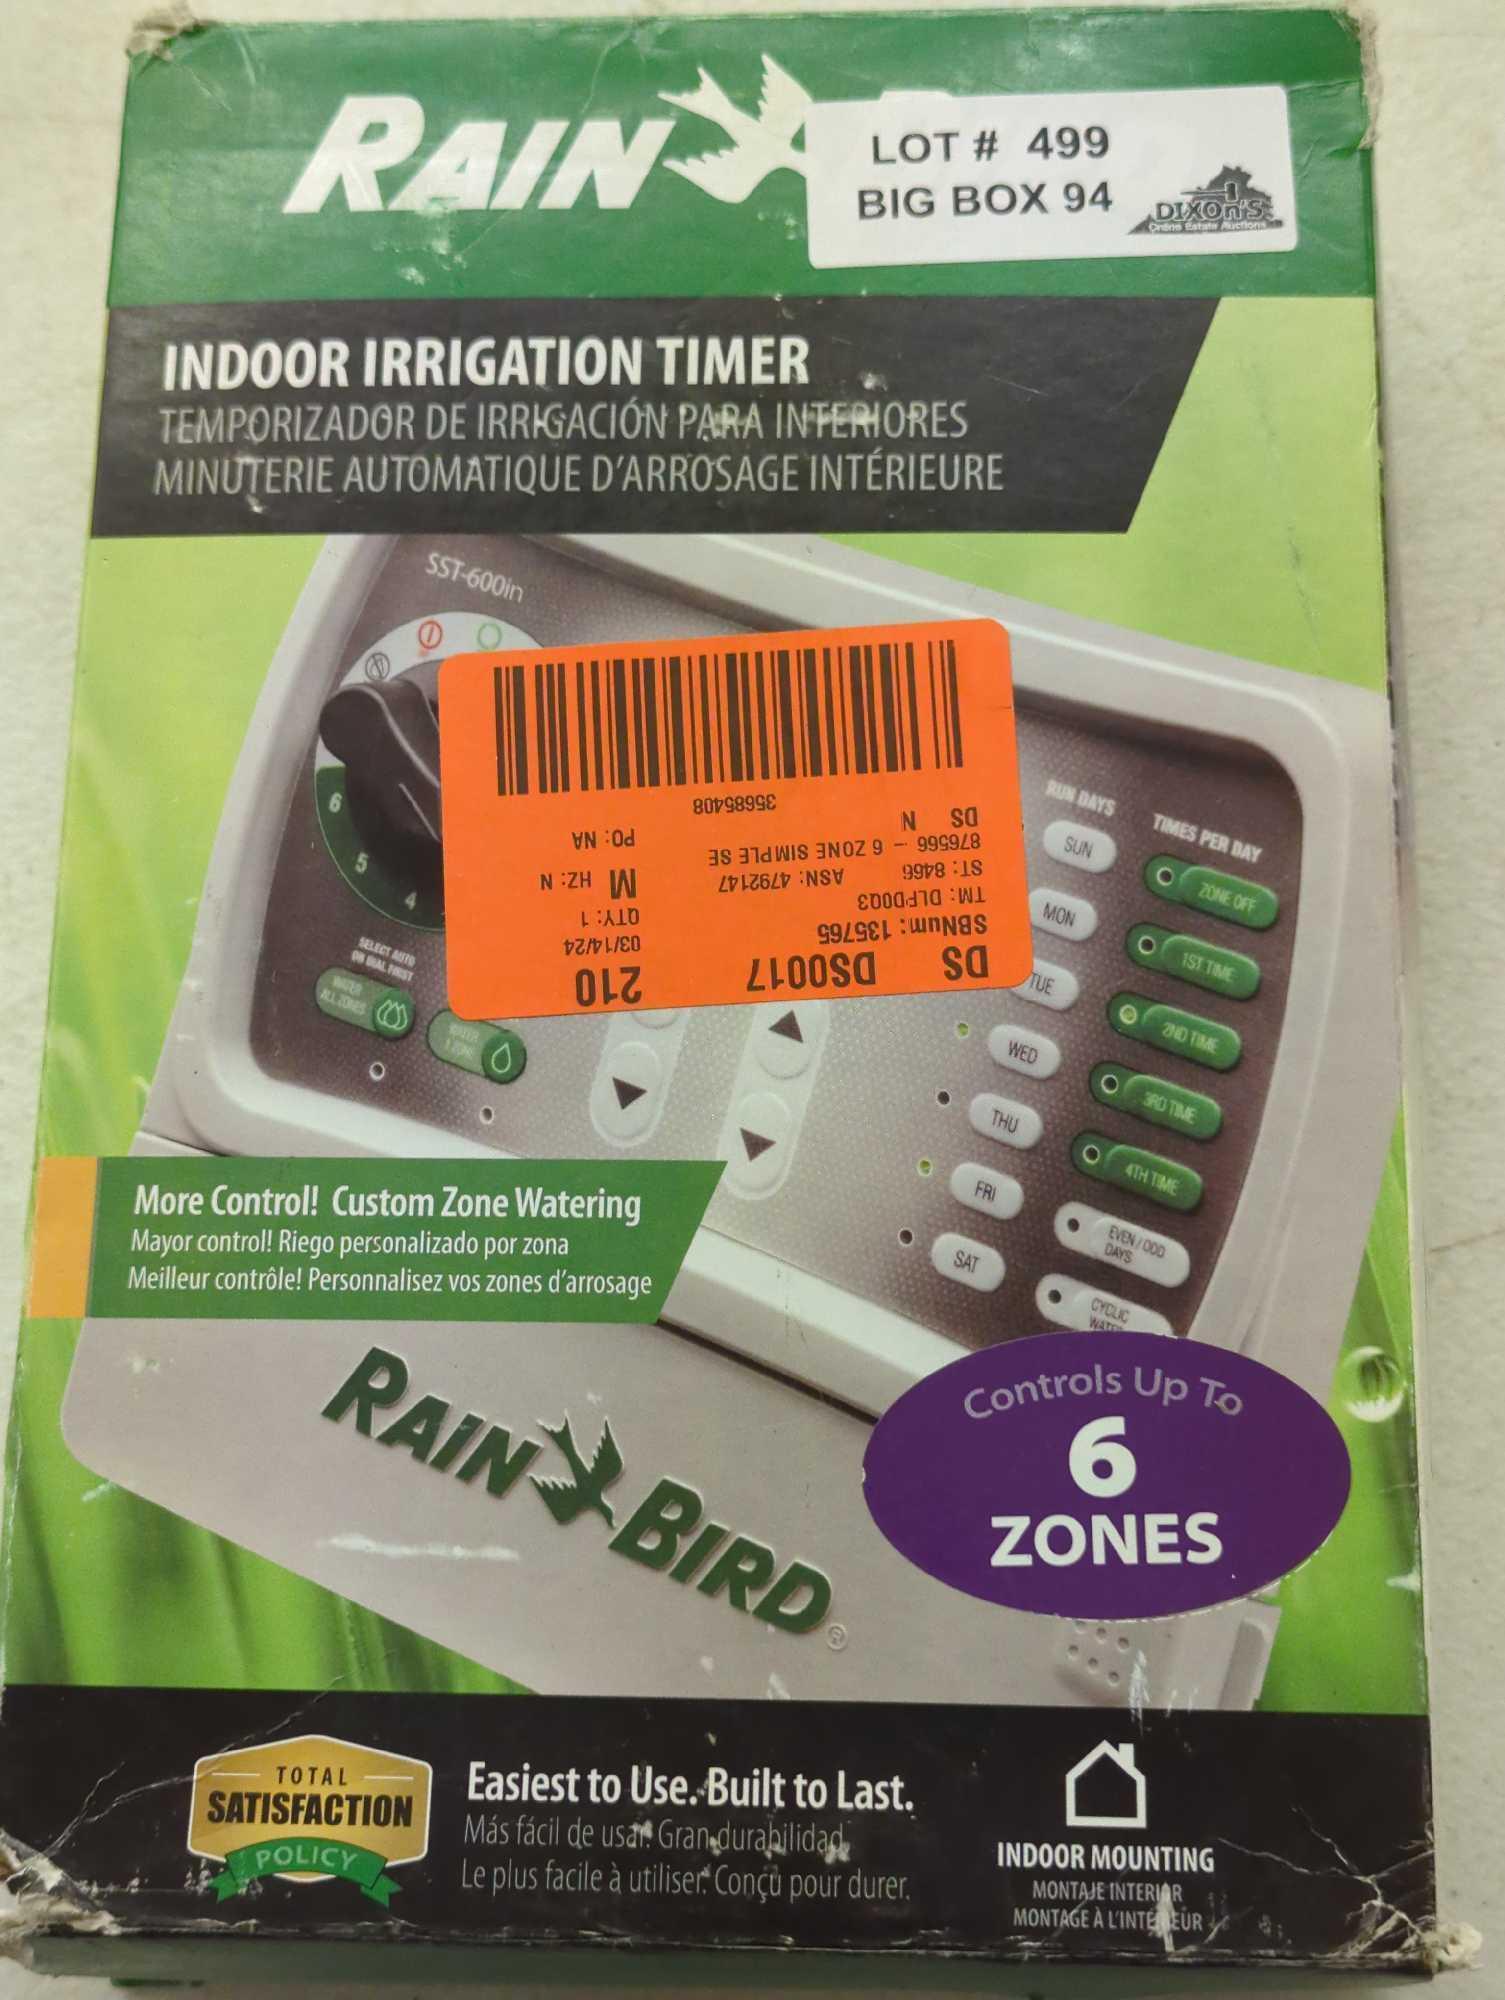 Rain Bird Simple-To-Set 6-Station Indoor Irrigation Timer, Appears to be New in Open Box Retail